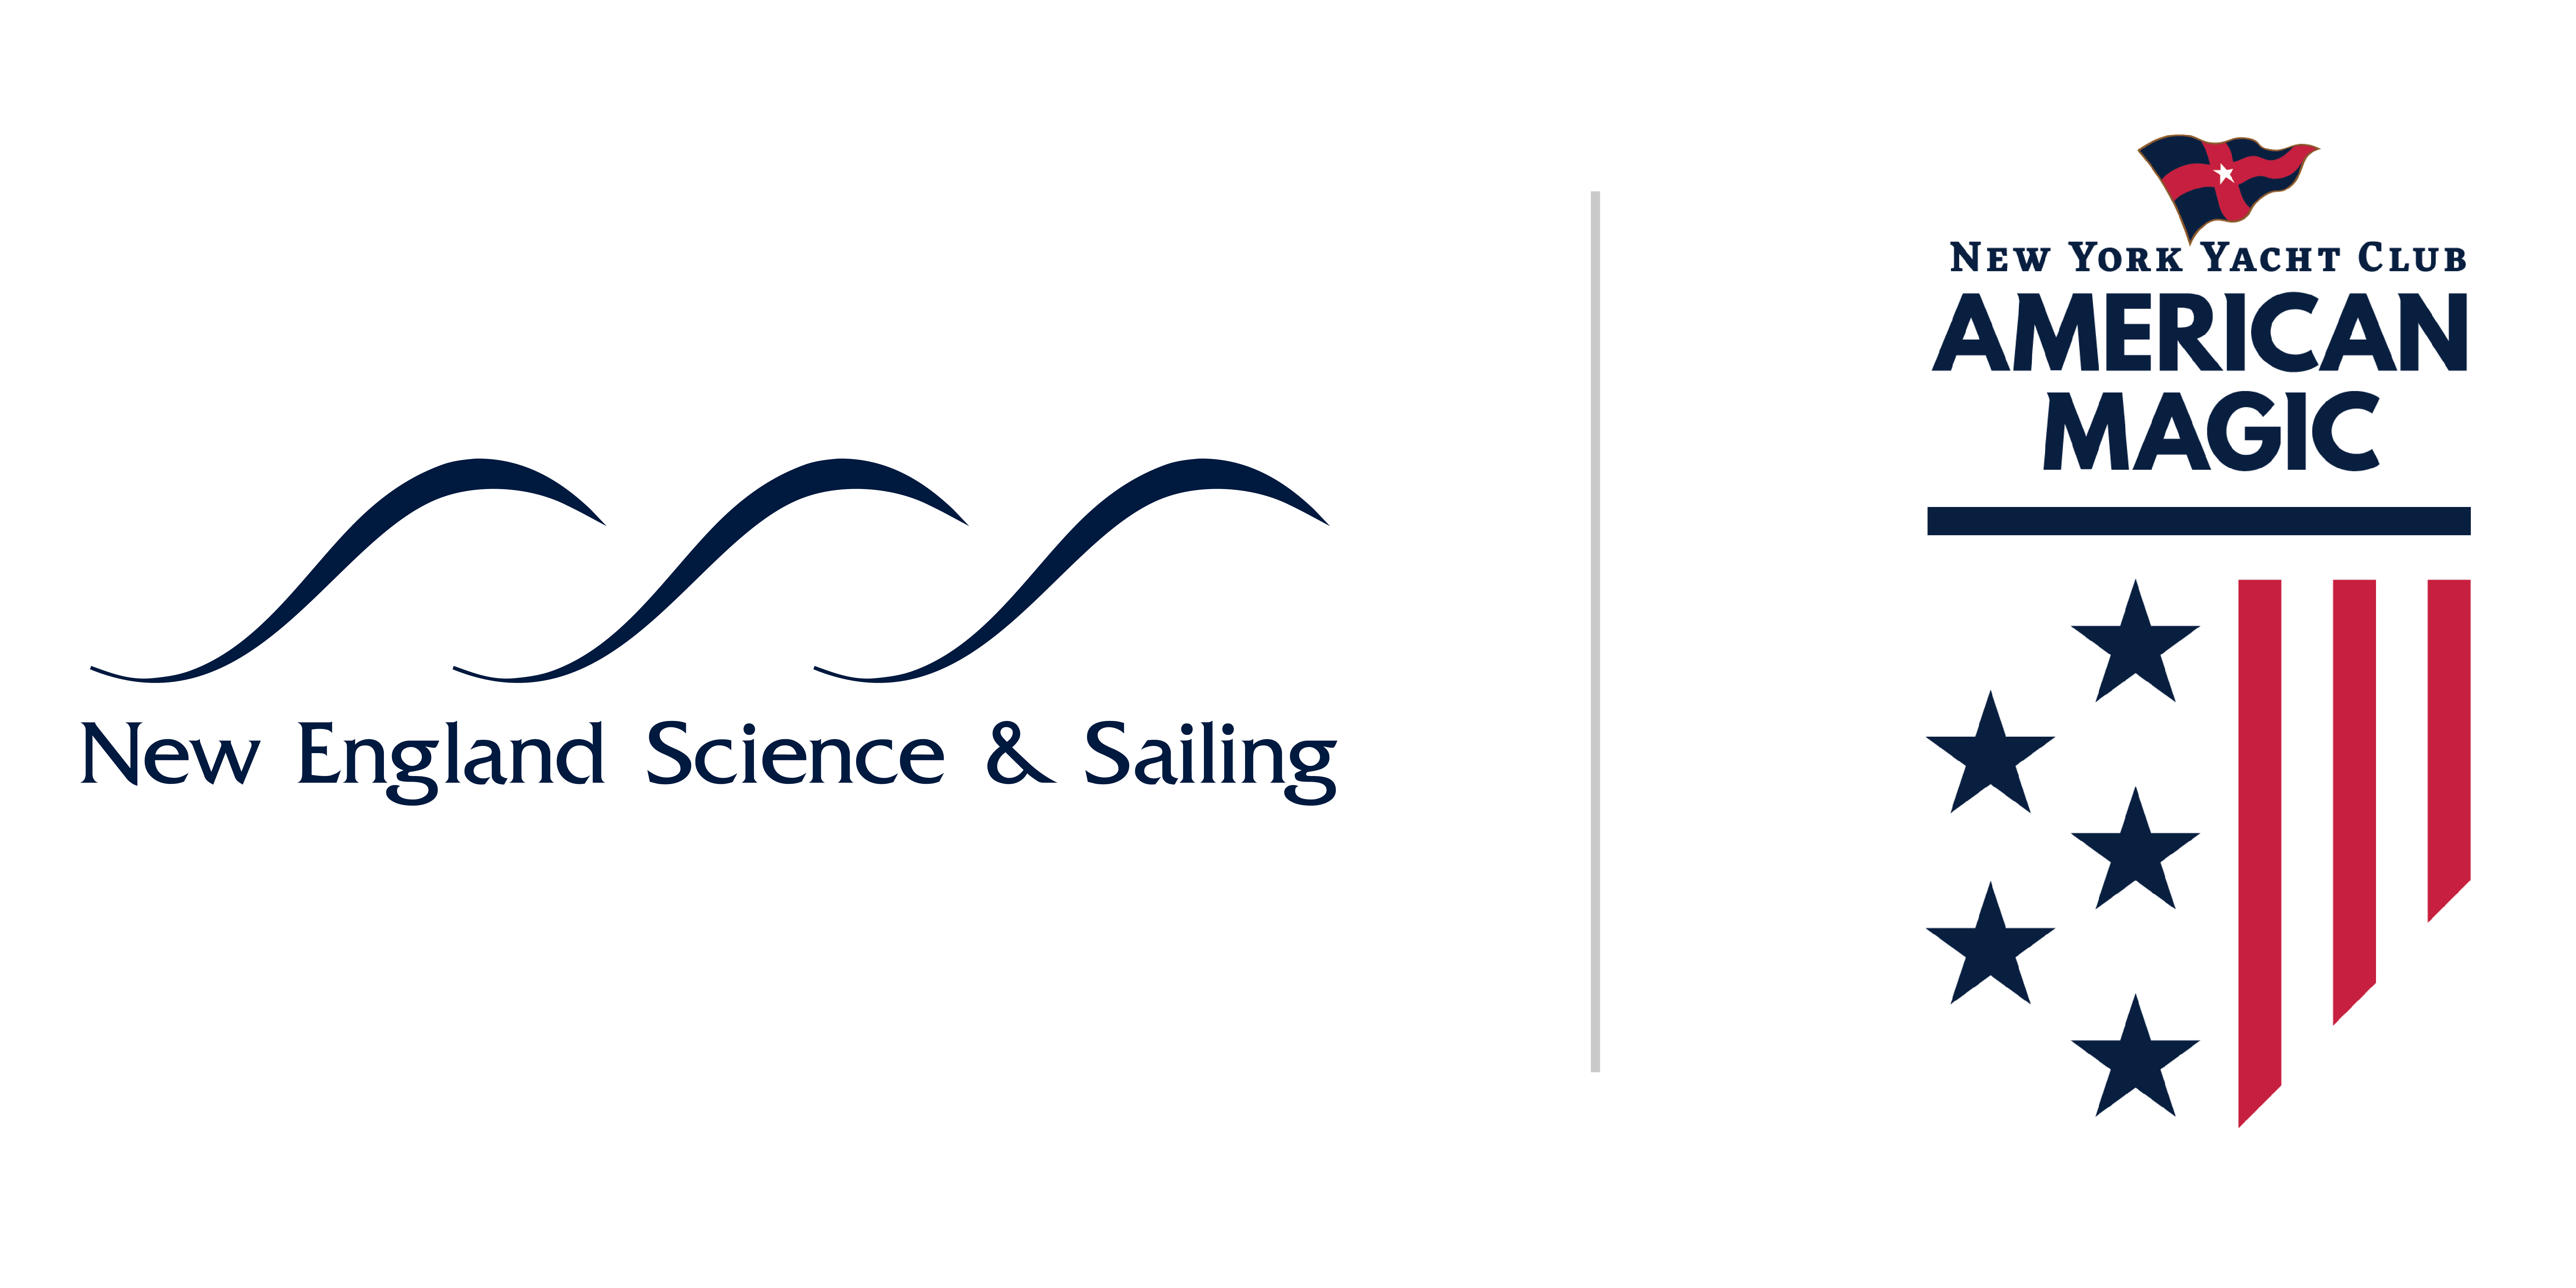 New York Yacht Club American Magic and New England Science & Sailing Release “Sail Locker” Educational Resources